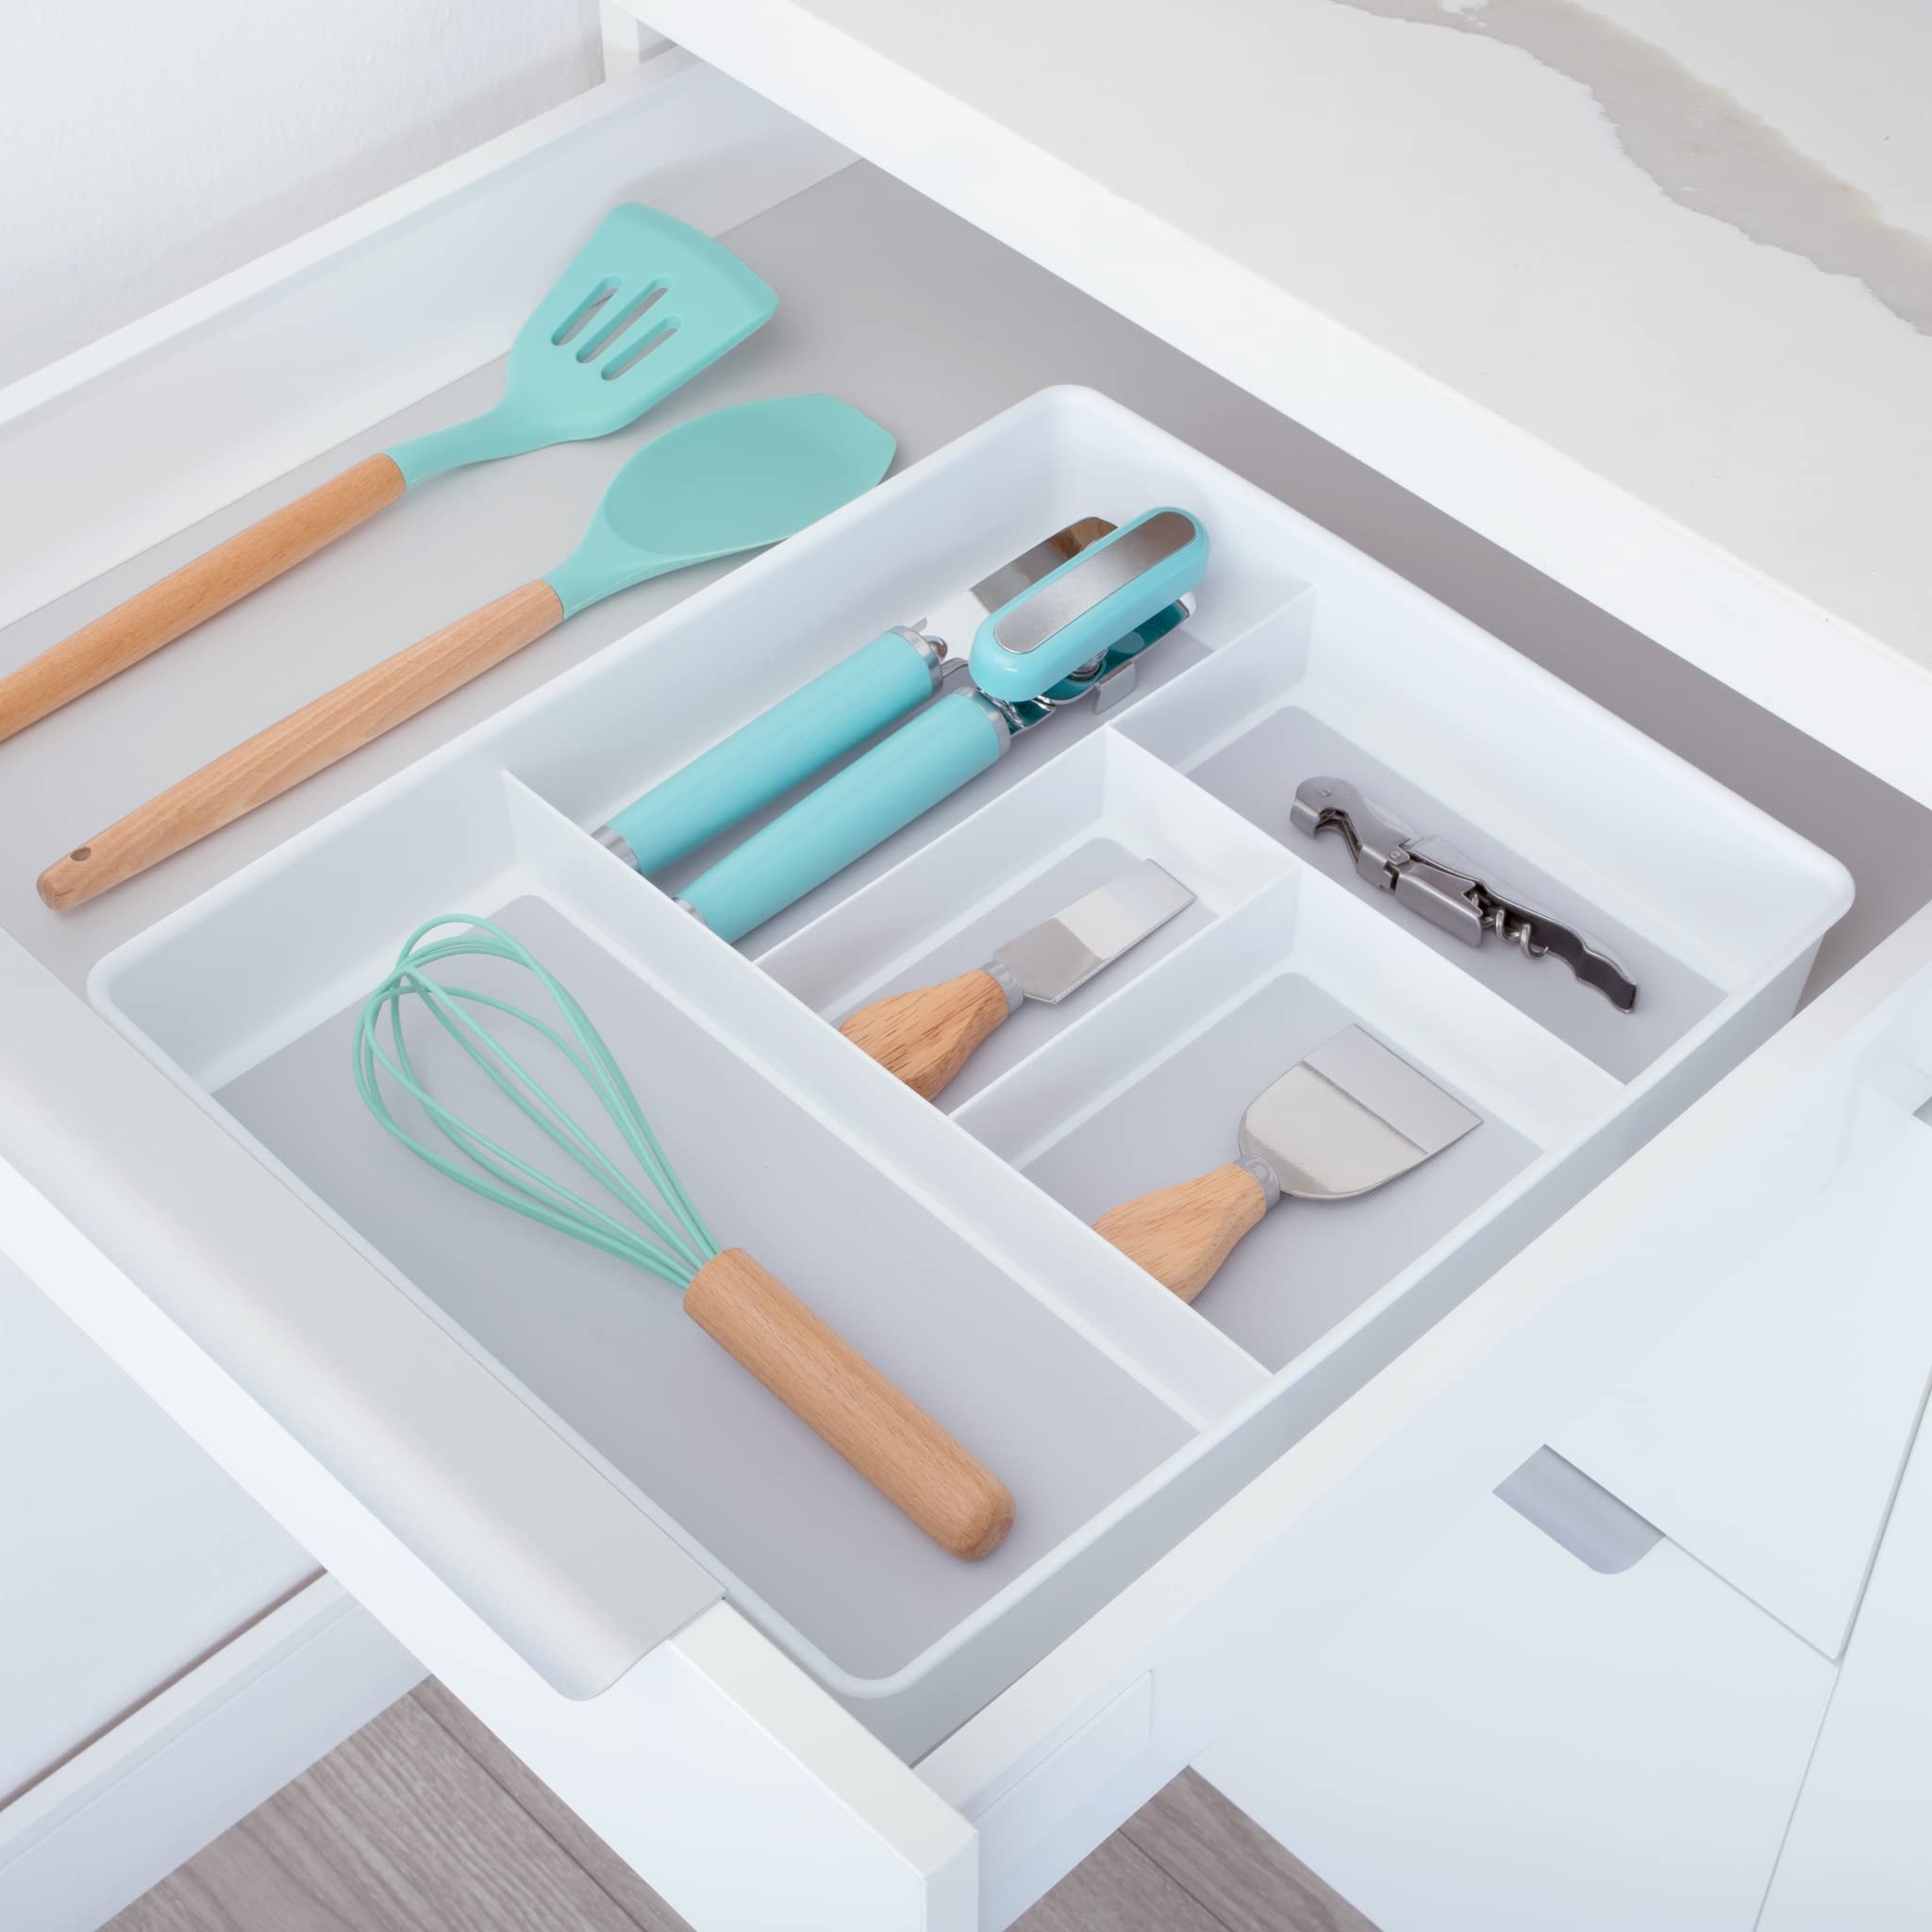 https://cdn.shopify.com/s/files/1/2393/7799/products/5-compartment-plastic-drawer-organizer-smart-design-kitchen-8003531-incrementing-number-110253.jpg?v=1679345864